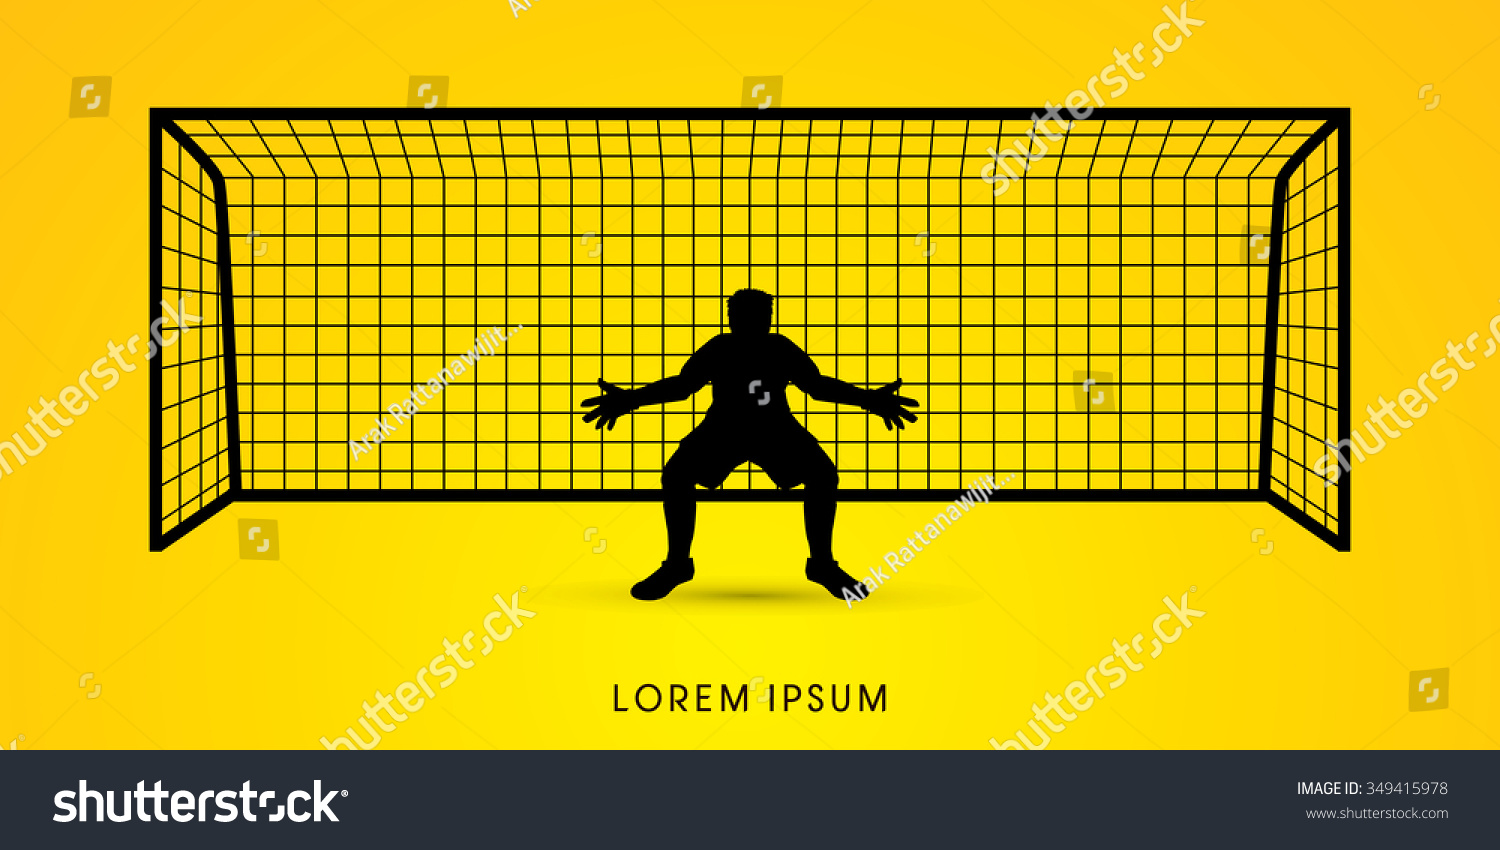 Silhouette Goalkeeper Standing Graphic Vector Stock Vector Royalty Free